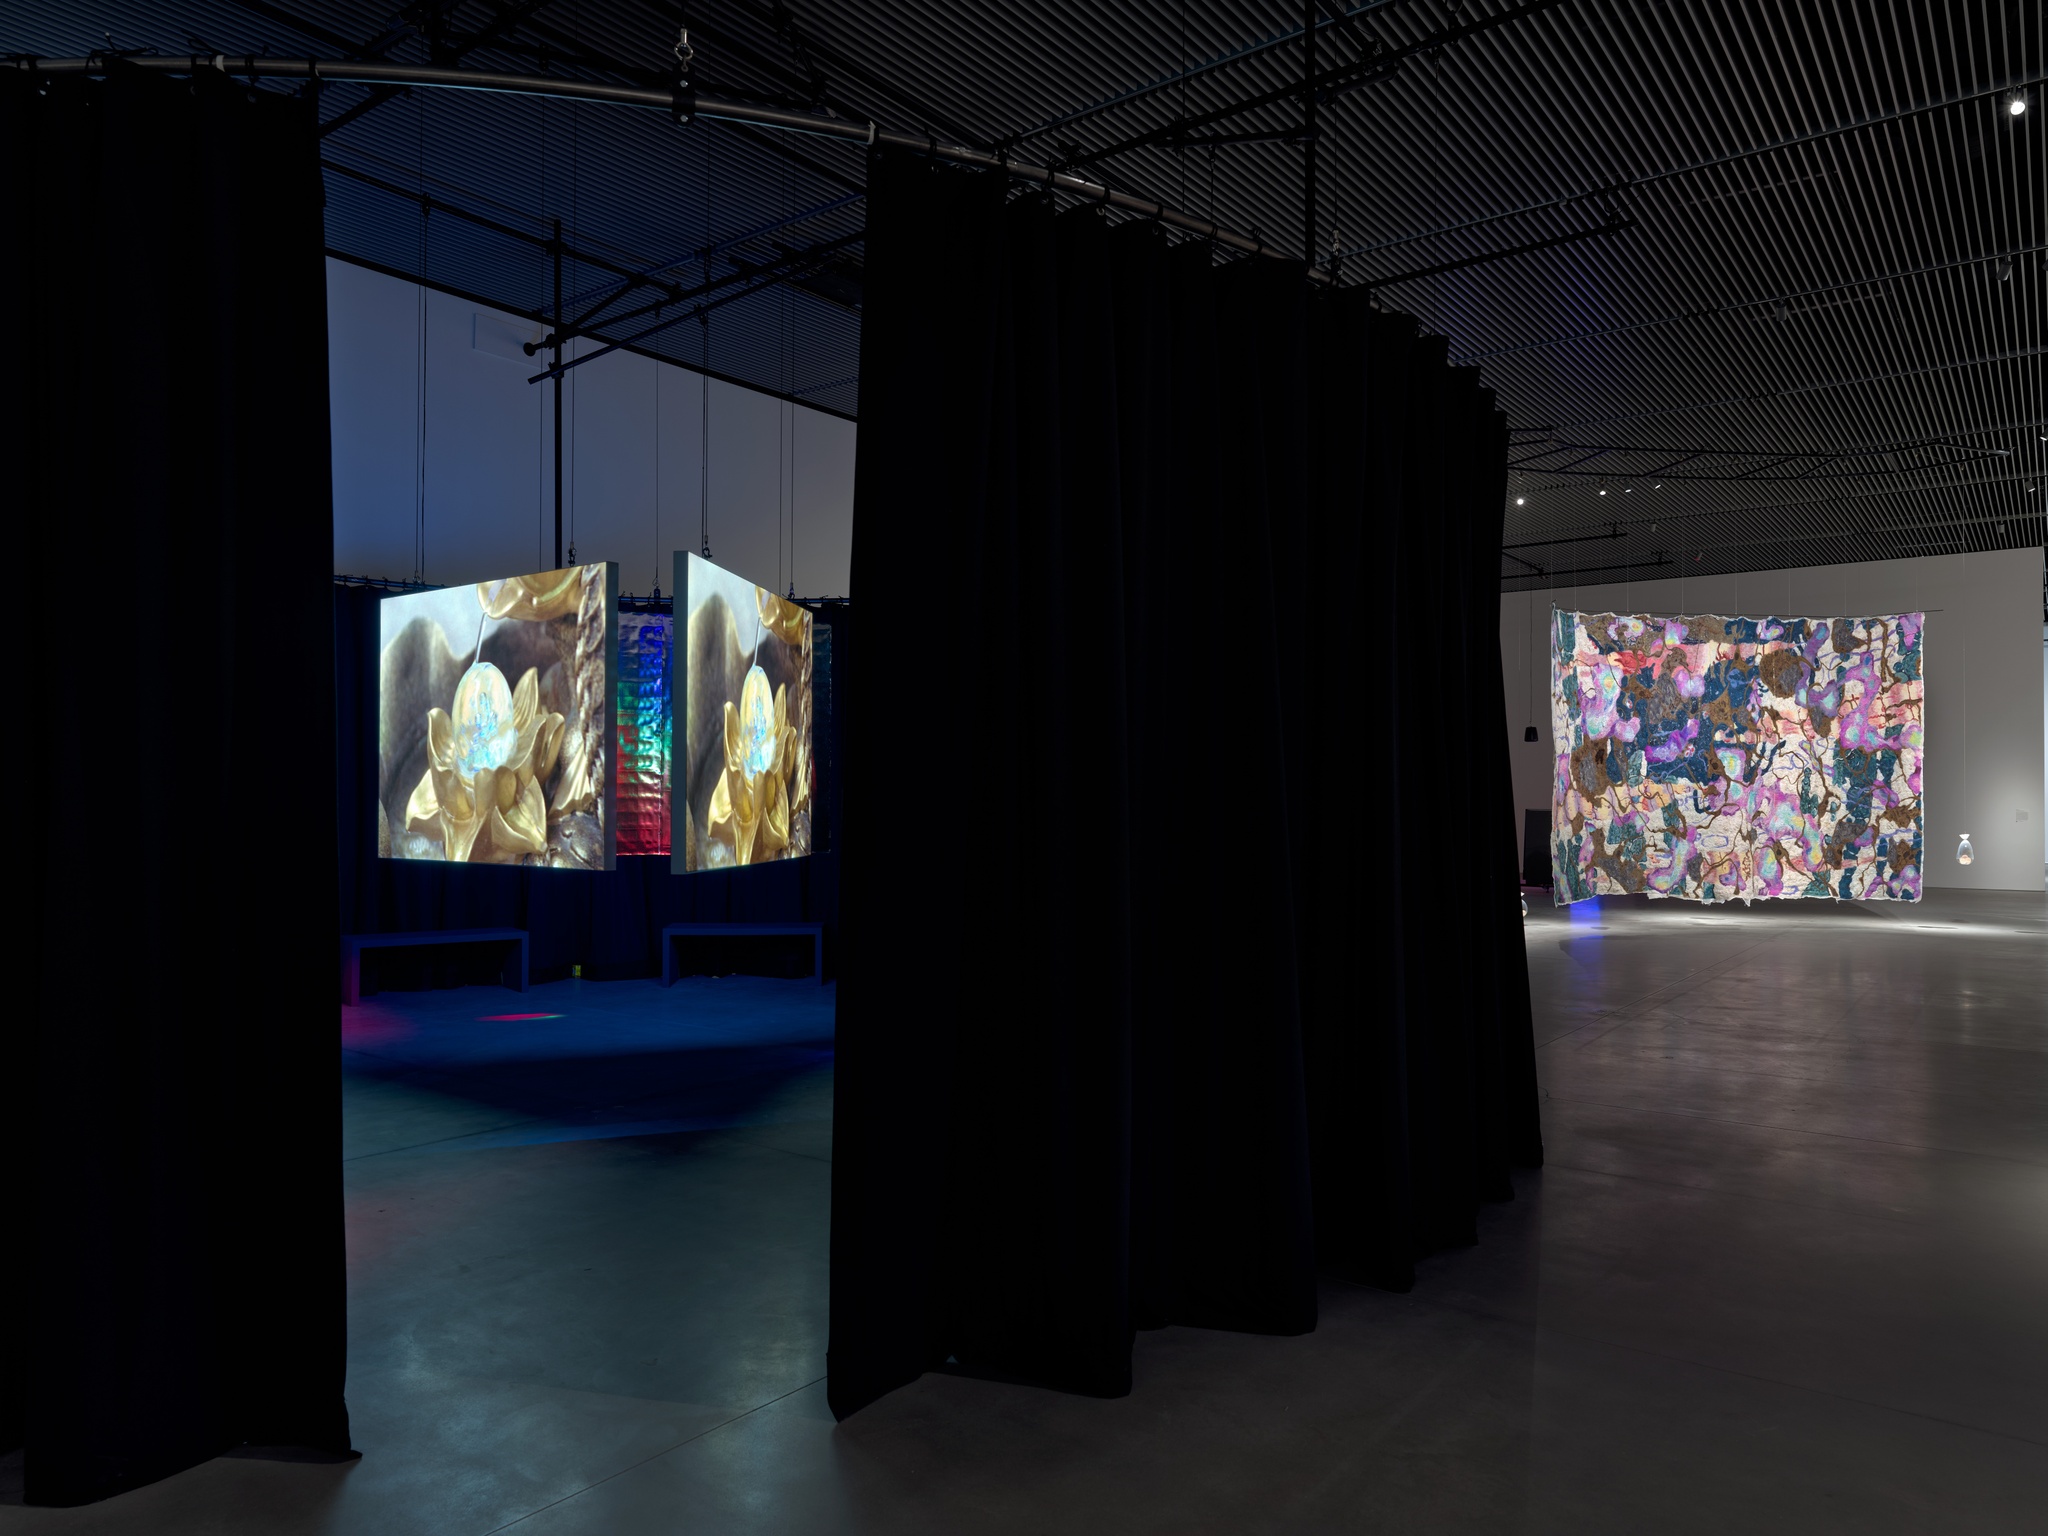 Two artworks in a gallery. On the left, a triangular formation of three video screens hangs inside a circular area defined by heavy dark drapes. On the right in the background hangs a multicolored abstract felt tapestry.